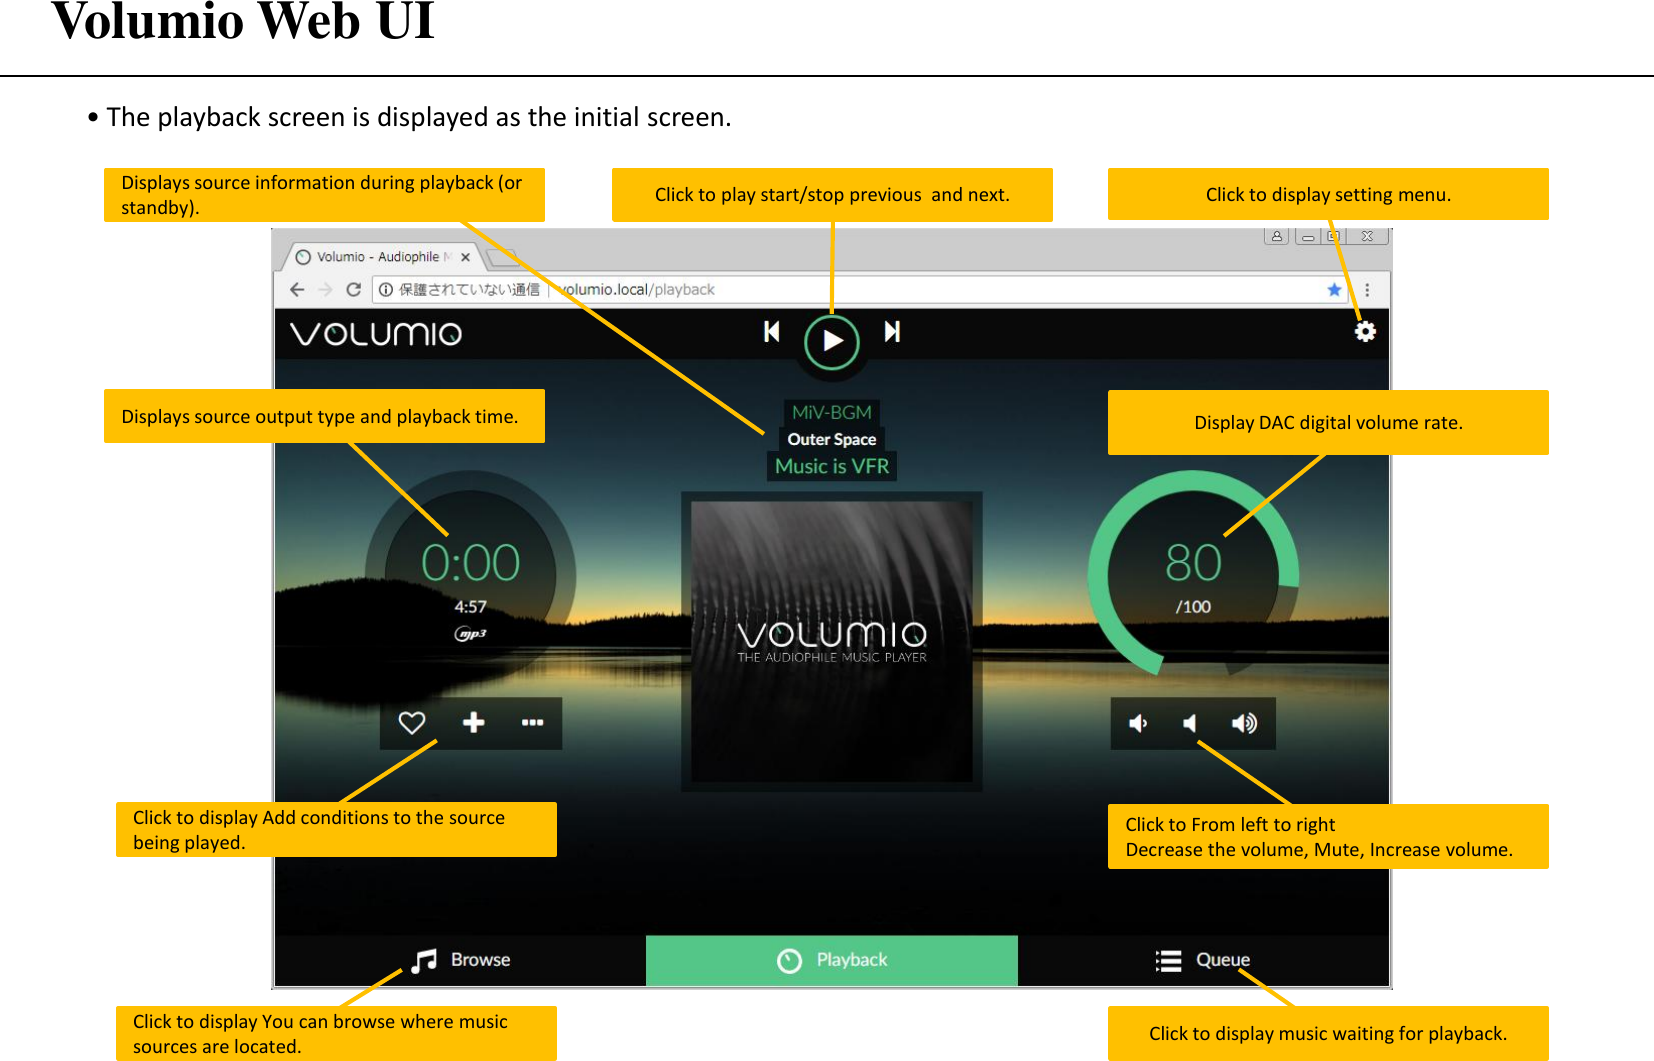 Volumio Web UI • The playback screen is displayed as the initial screen. Click to display You can browse where music sources are located.  Click to display music waiting for playback. Click to From left to right  Decrease the volume, Mute, Increase volume. Click to display setting menu. Click to display Add conditions to the source being played. Displays source information during playback (or standby).  Click to play start/stop previous  and next. Displays source output type and playback time.  Display DAC digital volume rate. 